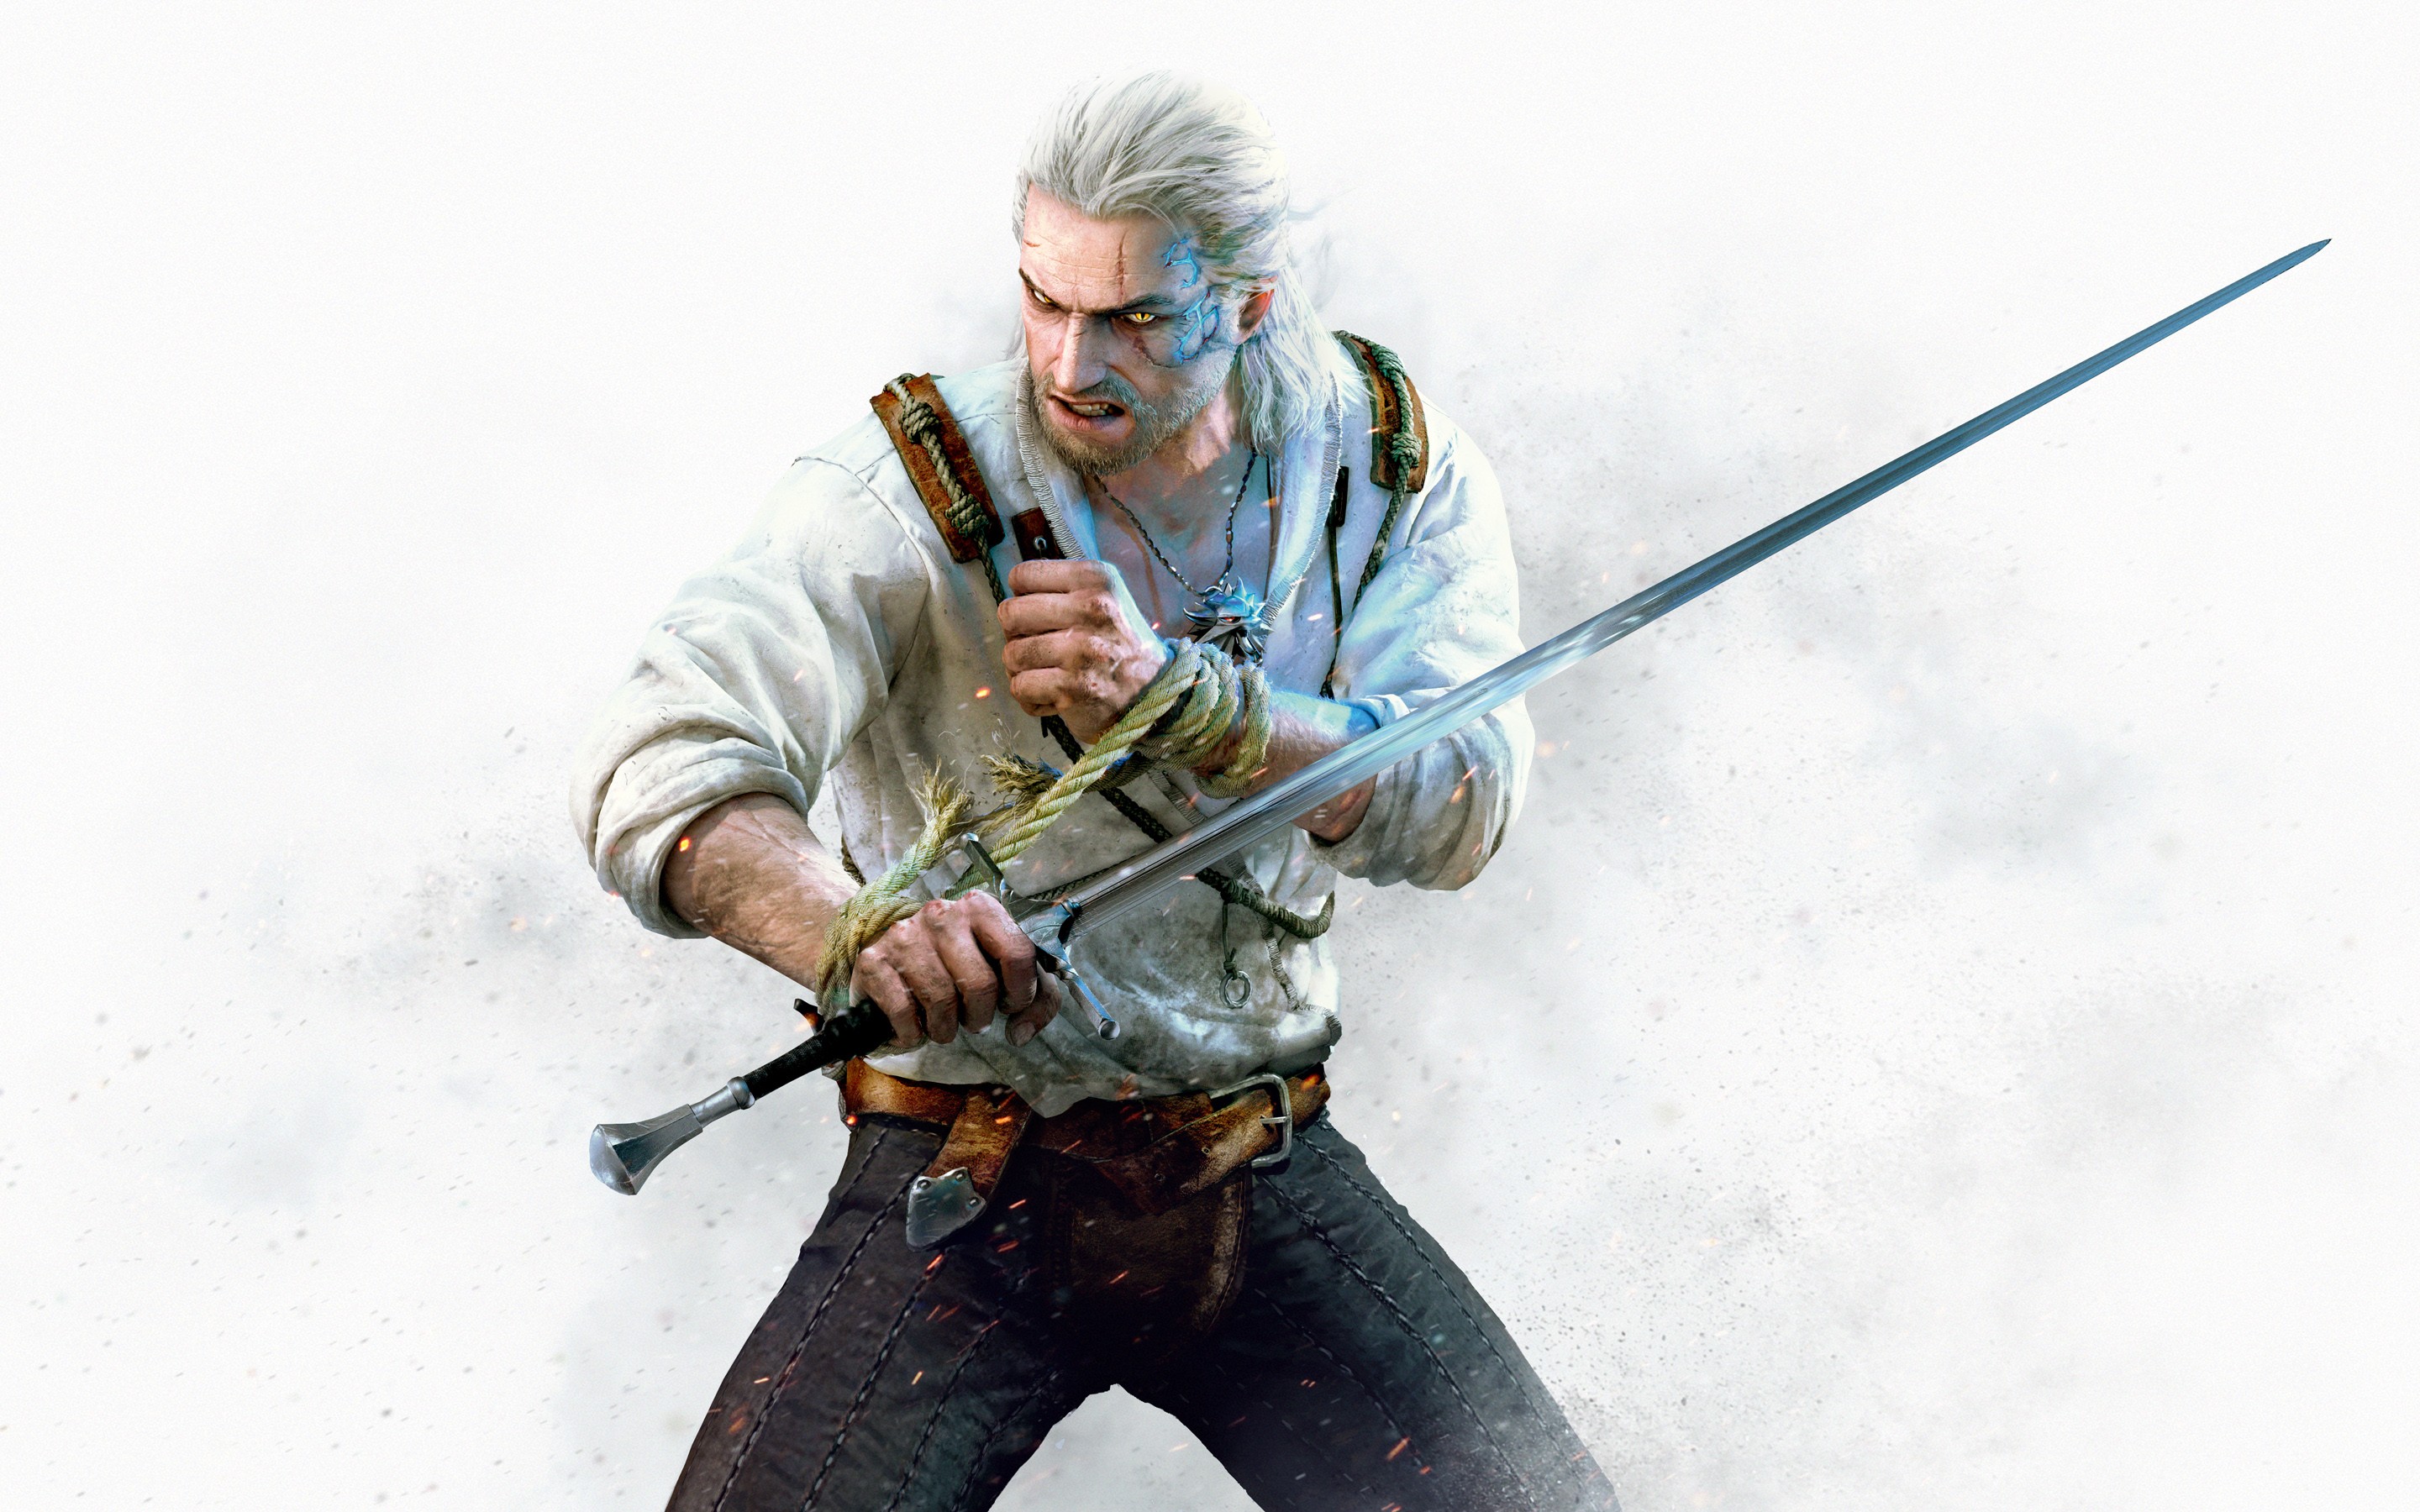 General 2880x1800 The Witcher 3: Wild Hunt Video Game Heroes video games RPG fantasy men simple background sword Geralt of Rivia video game men video game characters PC gaming